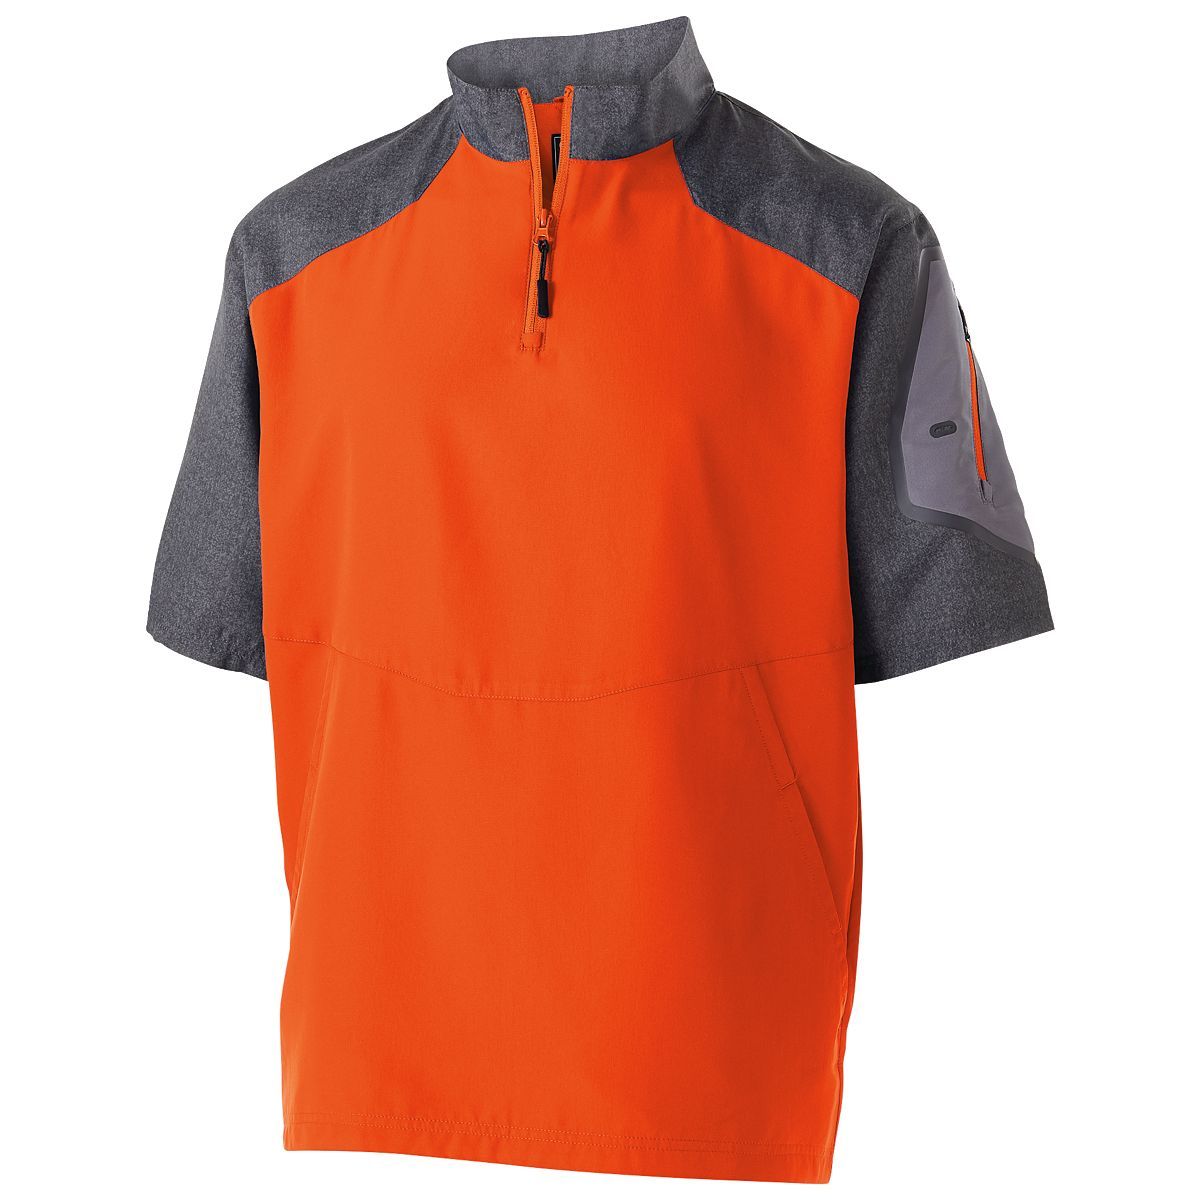 Holloway Raider  Short Sleeve Pullover in Carbon Print/Orange  -Part of the Adult, Adult-Pullover, Holloway, Outerwear product lines at KanaleyCreations.com